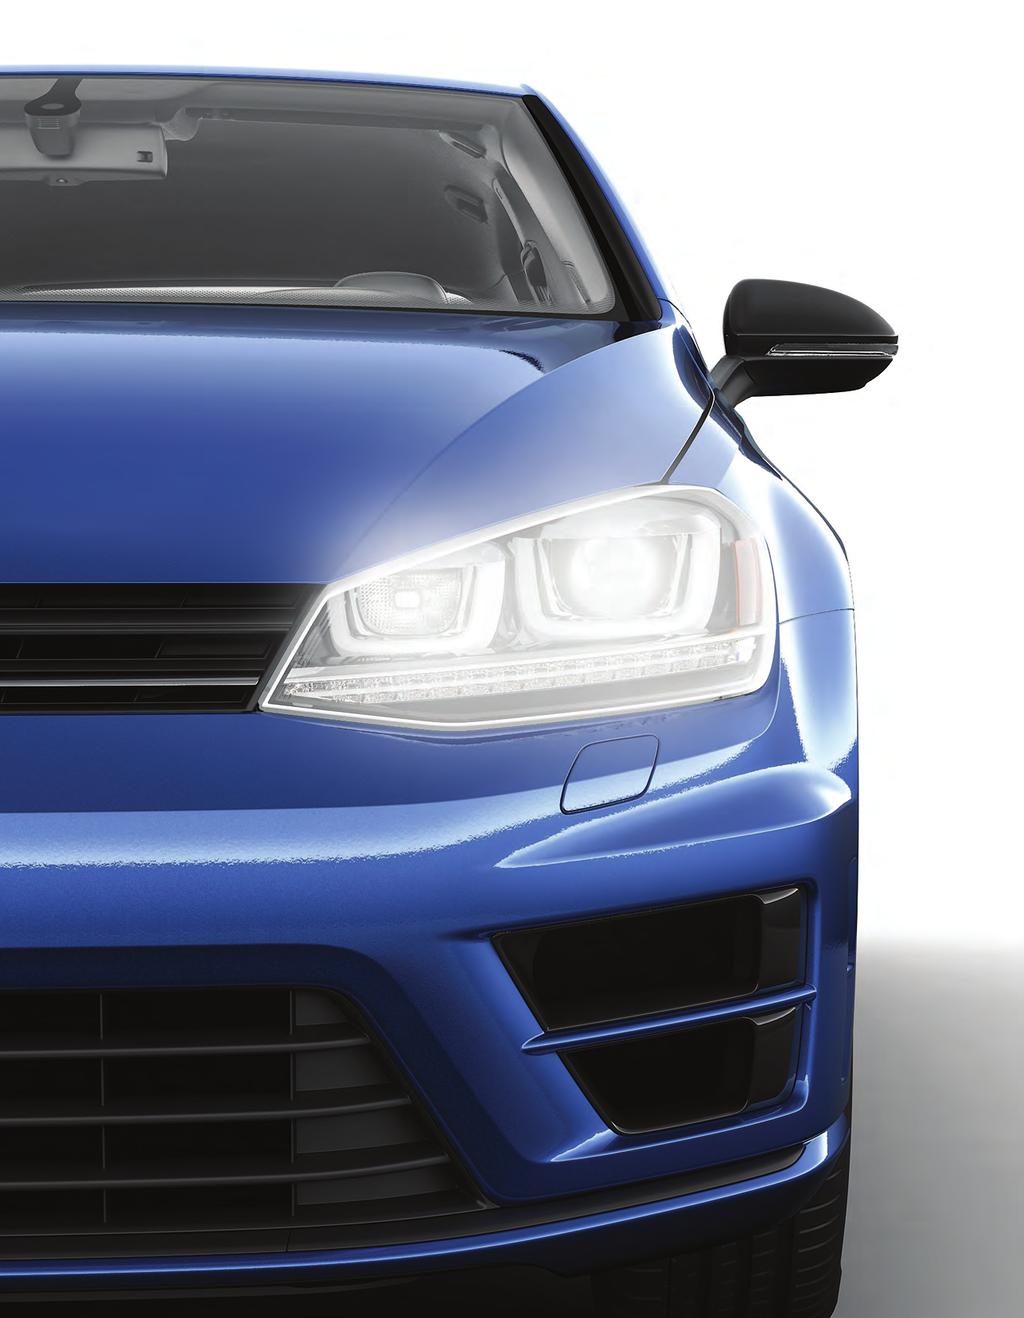 Features Golf R Engines: 2.0 TSI 292 HP, 6-speed manual transmission with 4MOTION 2.